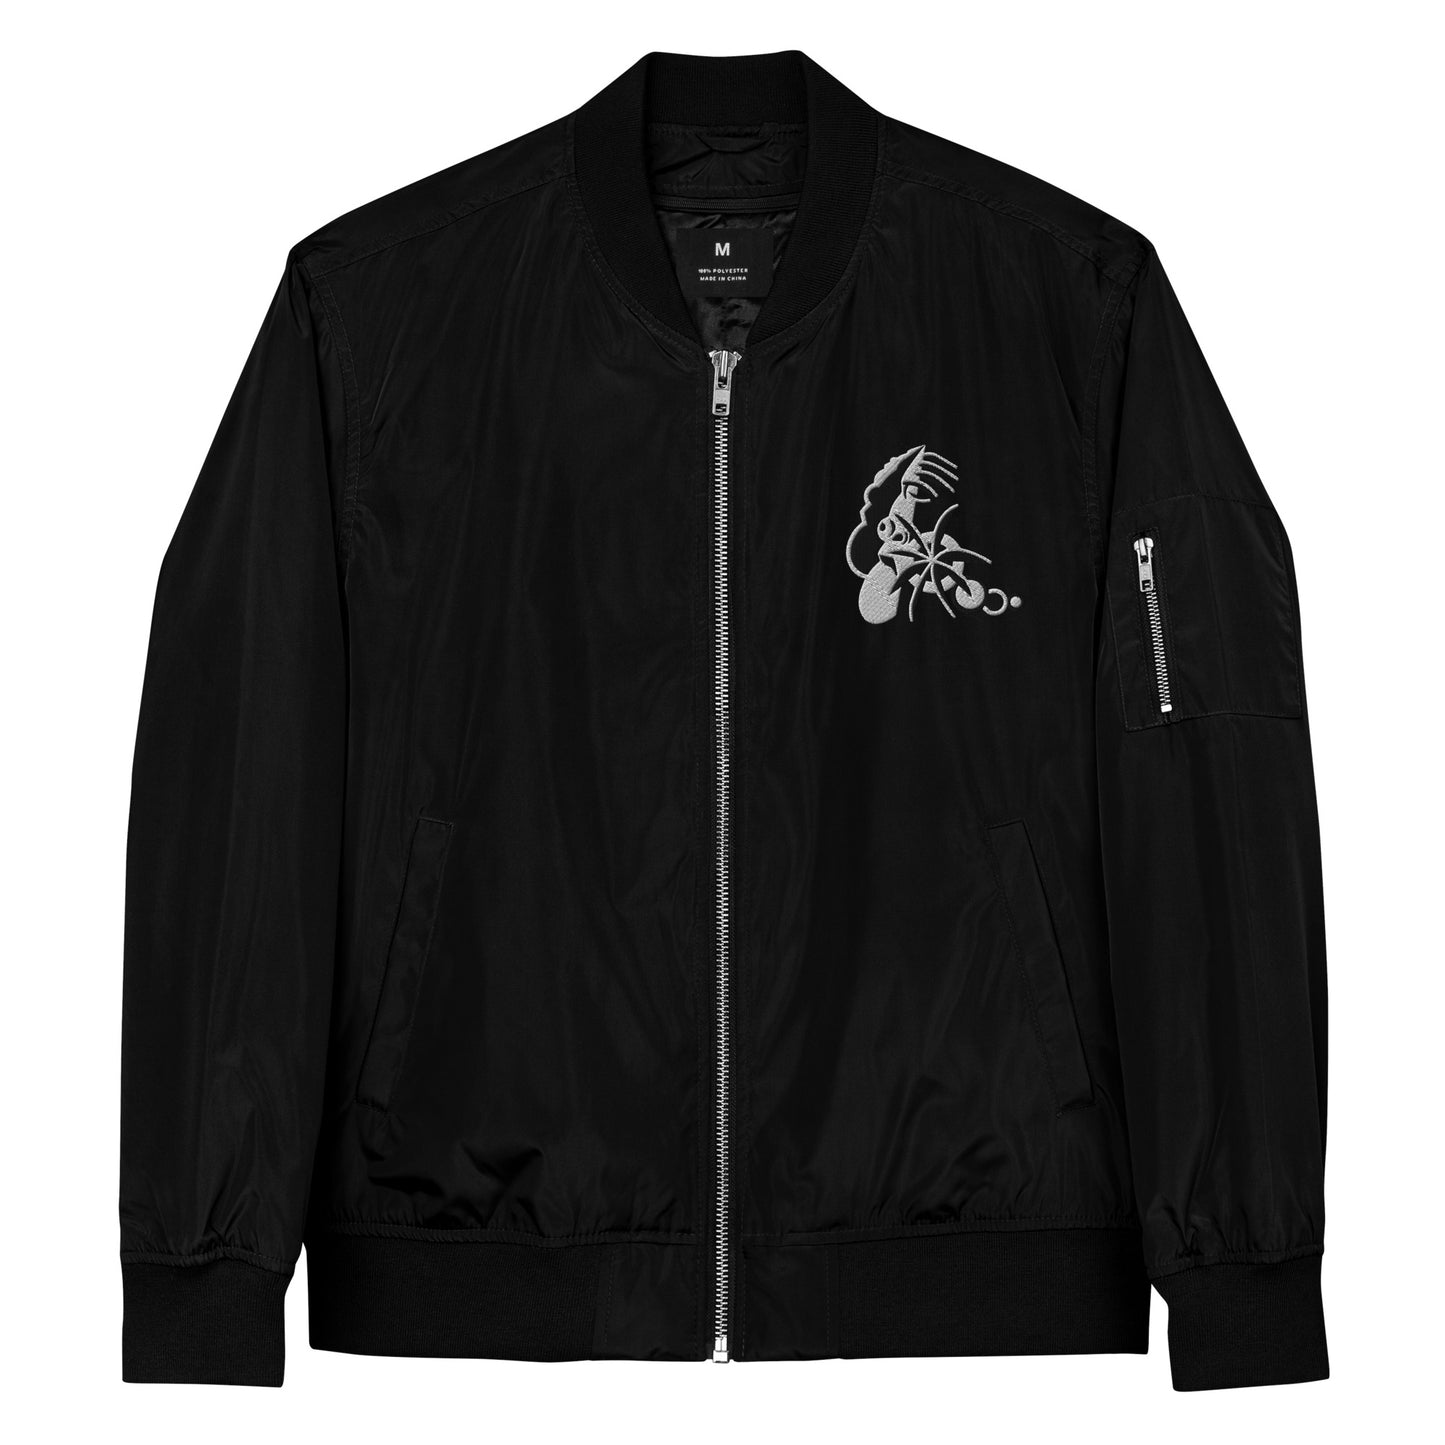 "The After Life" Premium recycled bomber jacket